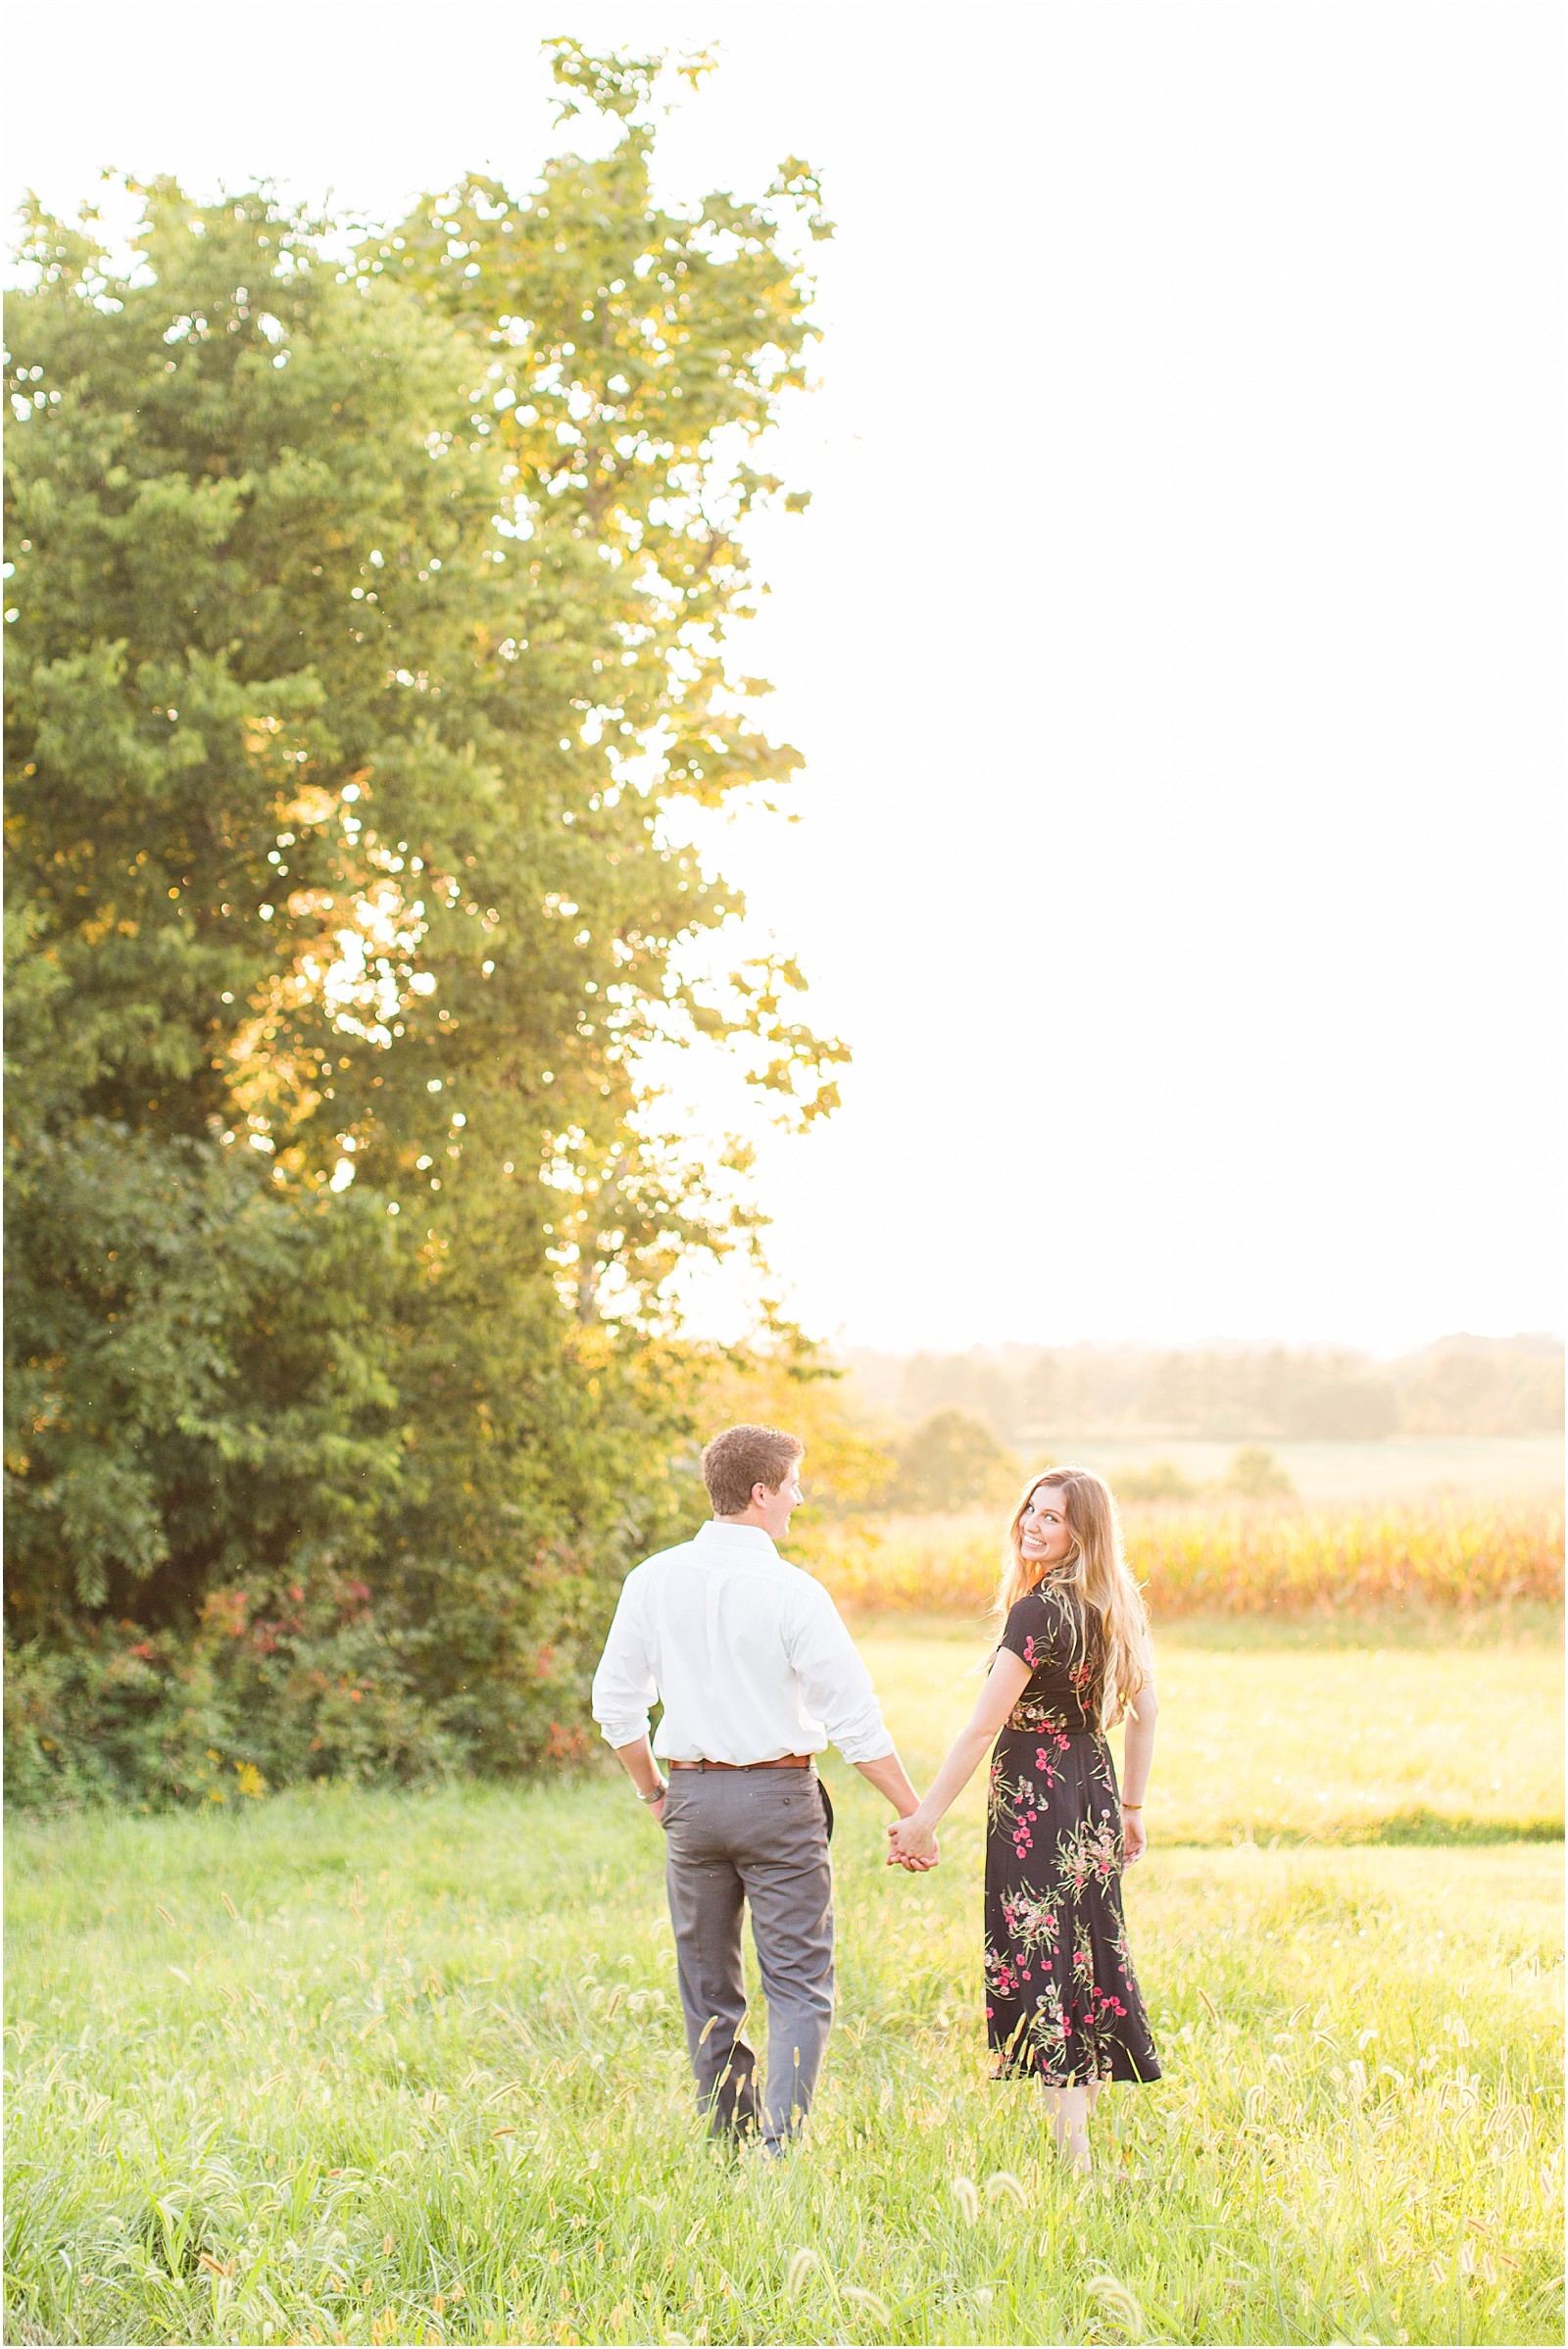 A Jasper Indiana Engagement Session | Tori and Kyle | Bret and Brandie Photography030.jpg